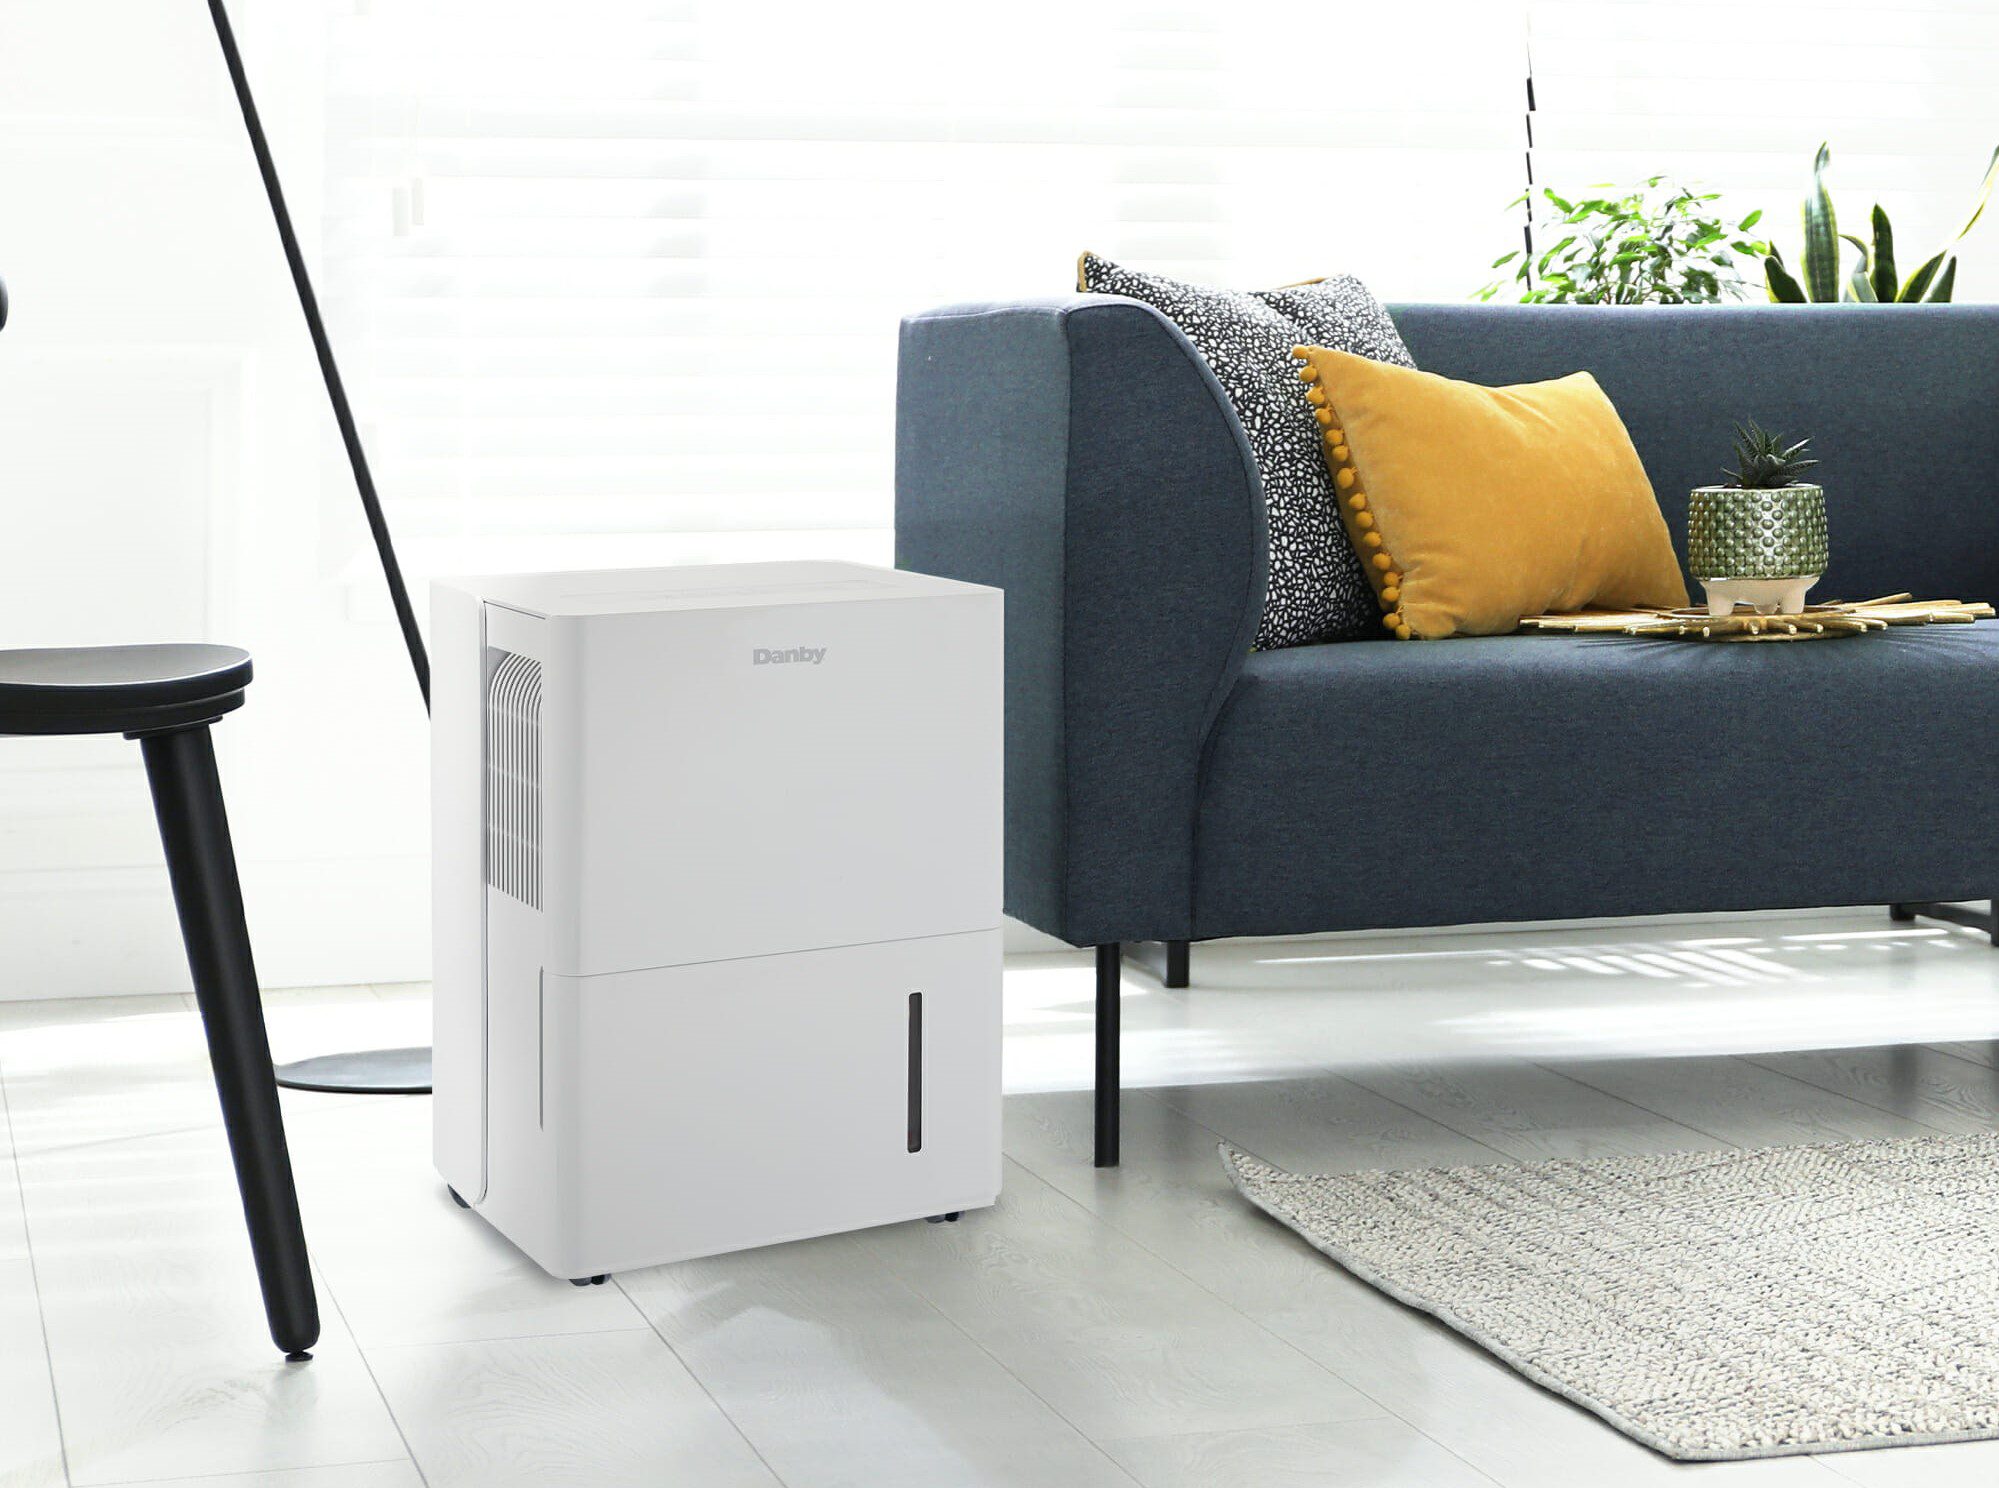 Is Your Home Too Humid? Try the Pelonis Dehumidifier!